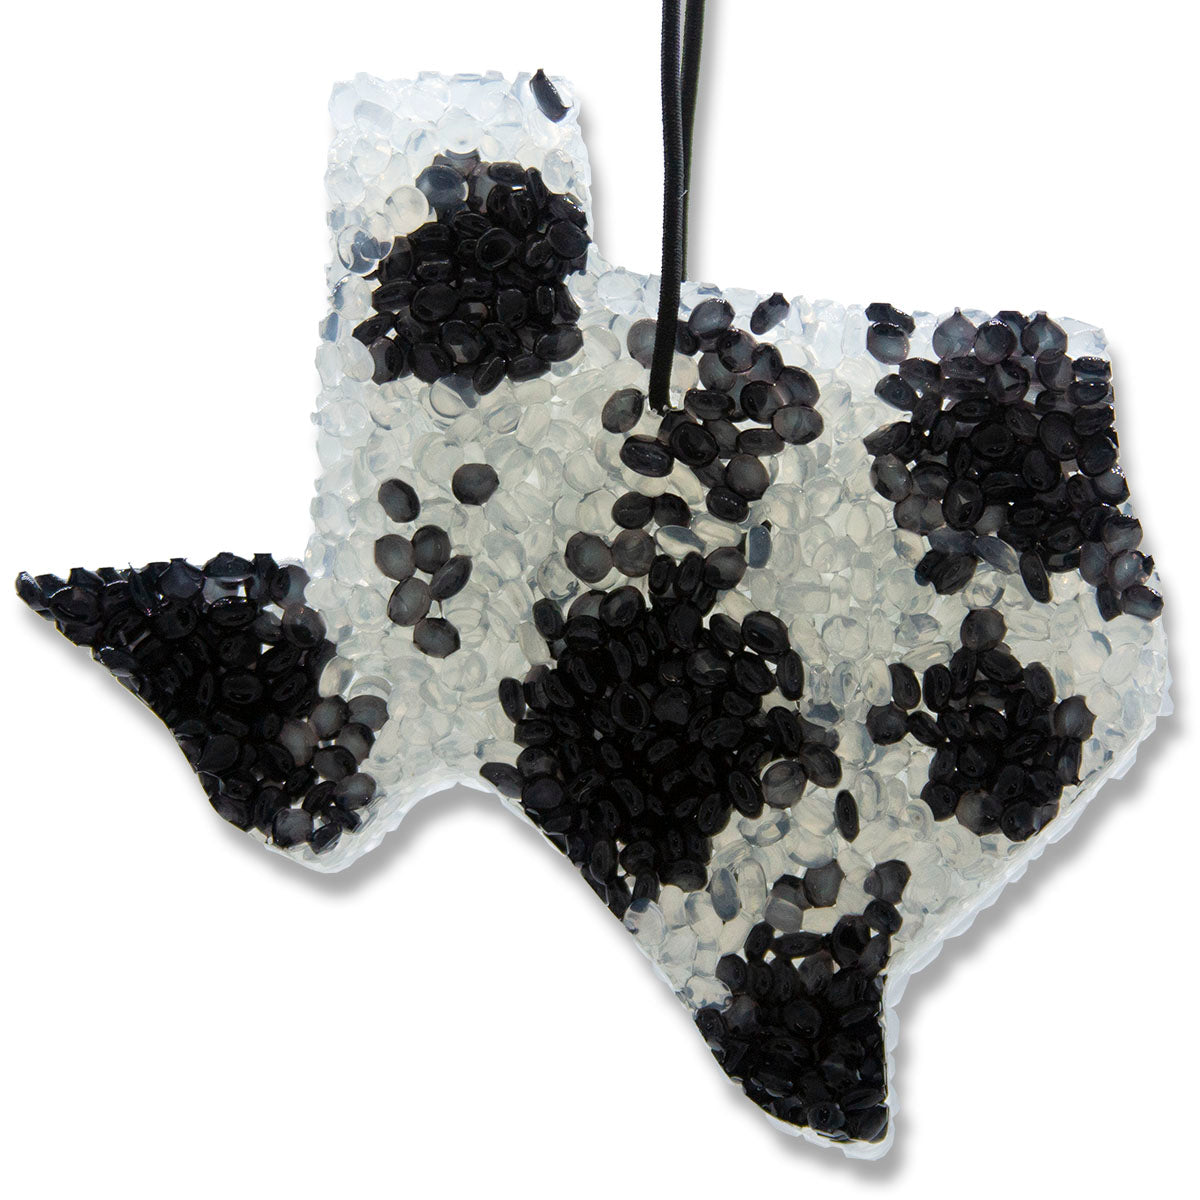 Love Spell, Lone Star Candles & More's Premium Strongly Scented Freshies, A Fruity Citrus Floral Mix, Car & Air Freshener, USA Made in Texas, Black TX Cowhide 1-Pack